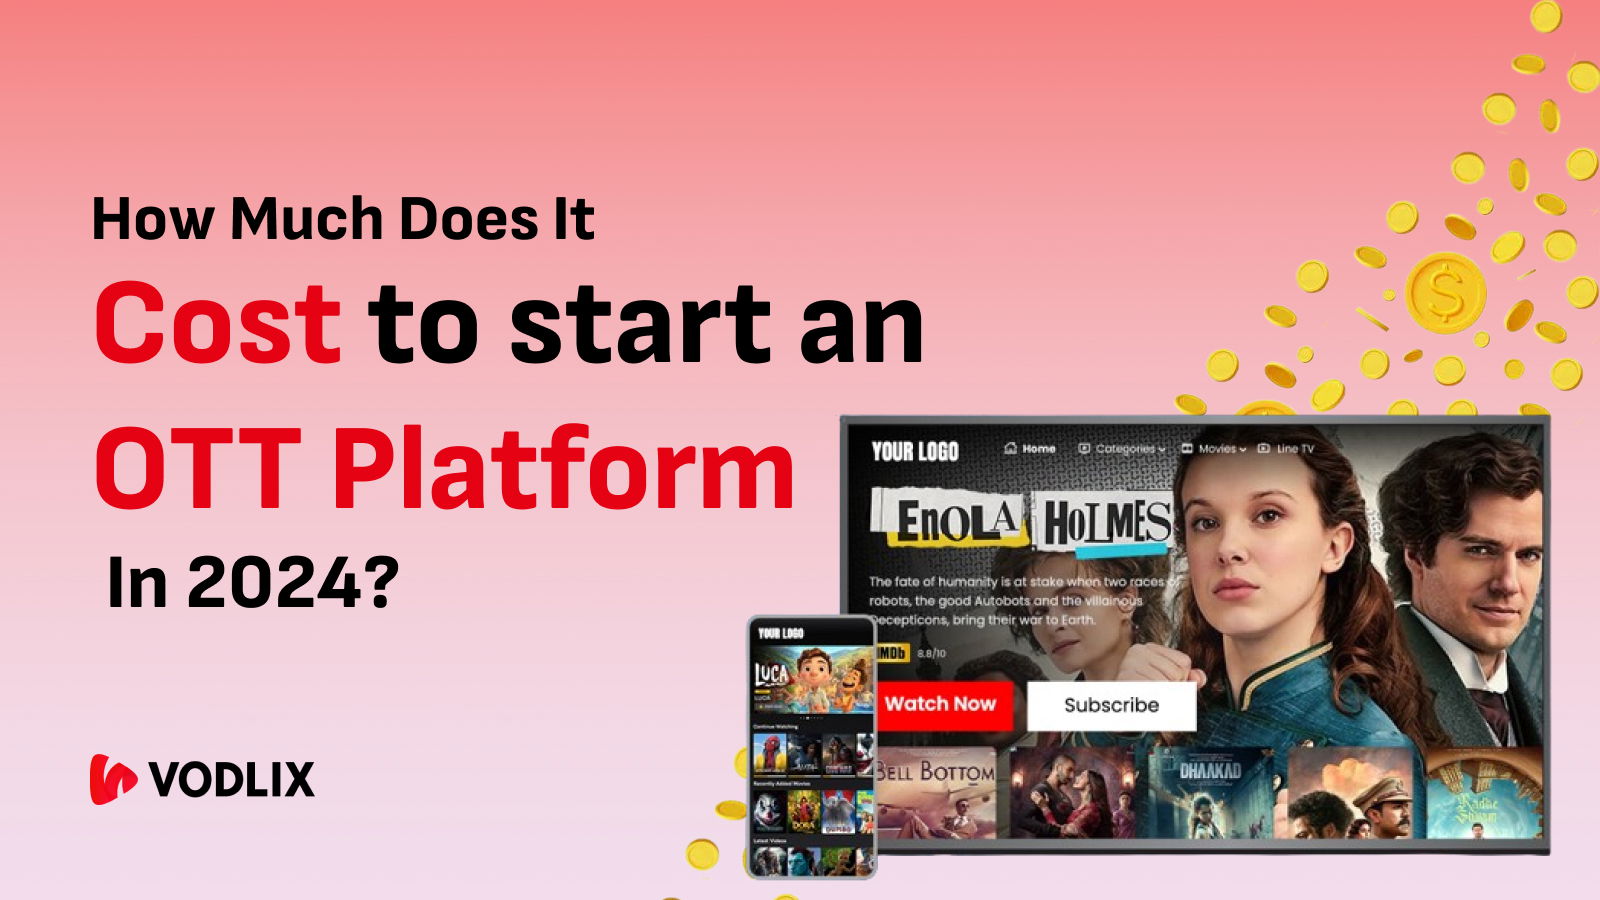 How Much Does It Cost to Start an OTT Platform in 2024?